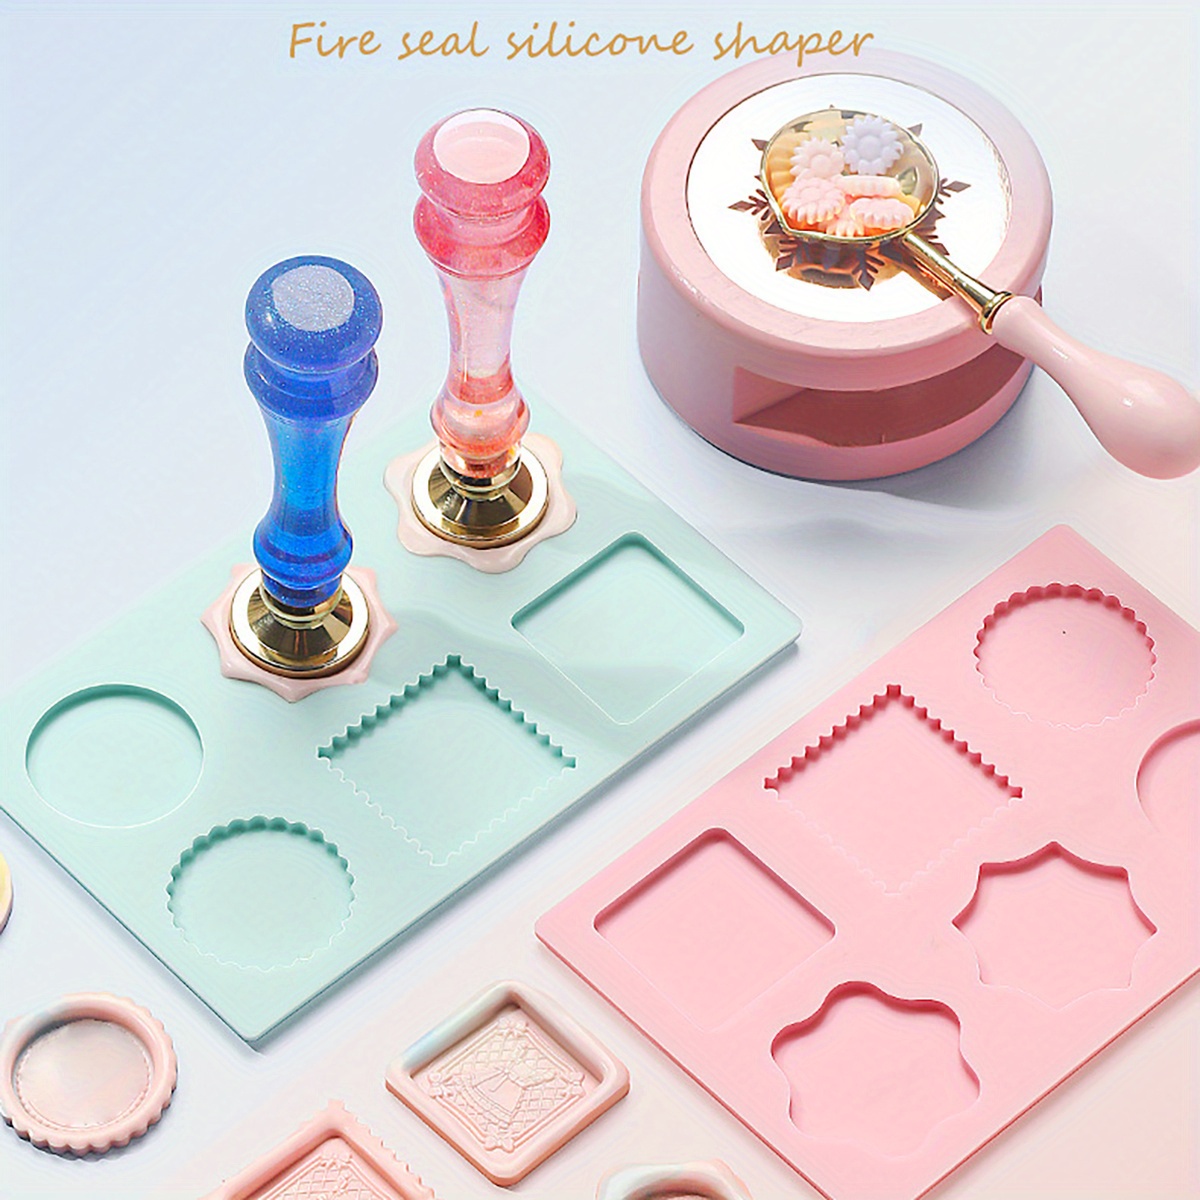 Wax Seal Silicone Mat for Wax Sealing Stamp, 24 Cavity Wax Seal Molds  Silicone with 200Pcs Removable Sticky Adhesive Dots for DIY Craft Adhesive